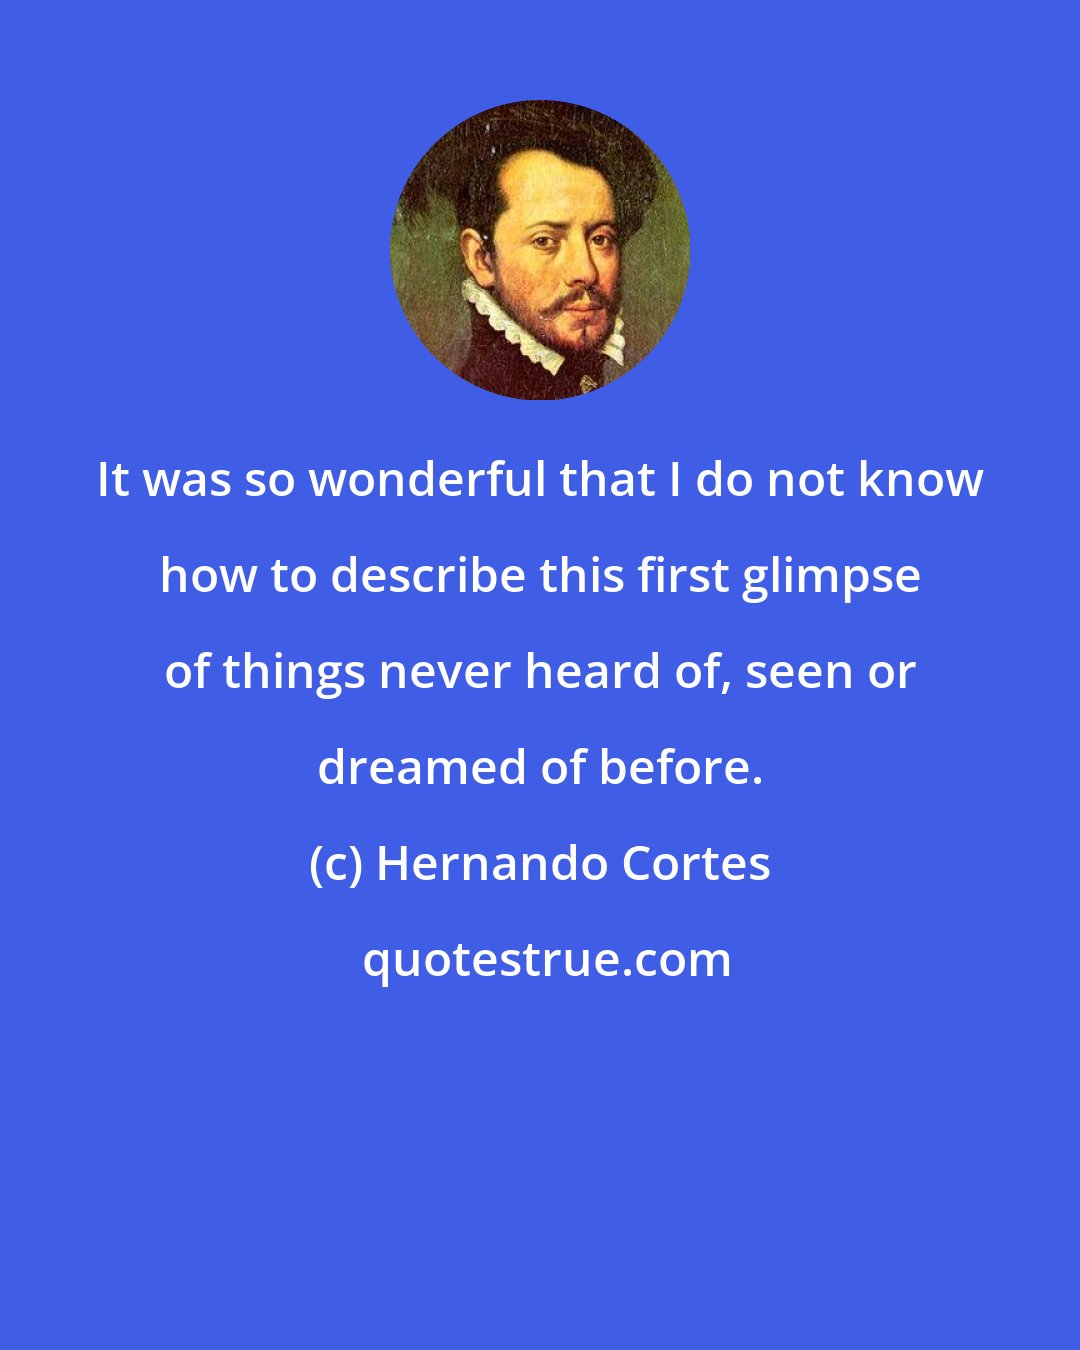 Hernando Cortes: It was so wonderful that I do not know how to describe this first glimpse of things never heard of, seen or dreamed of before.